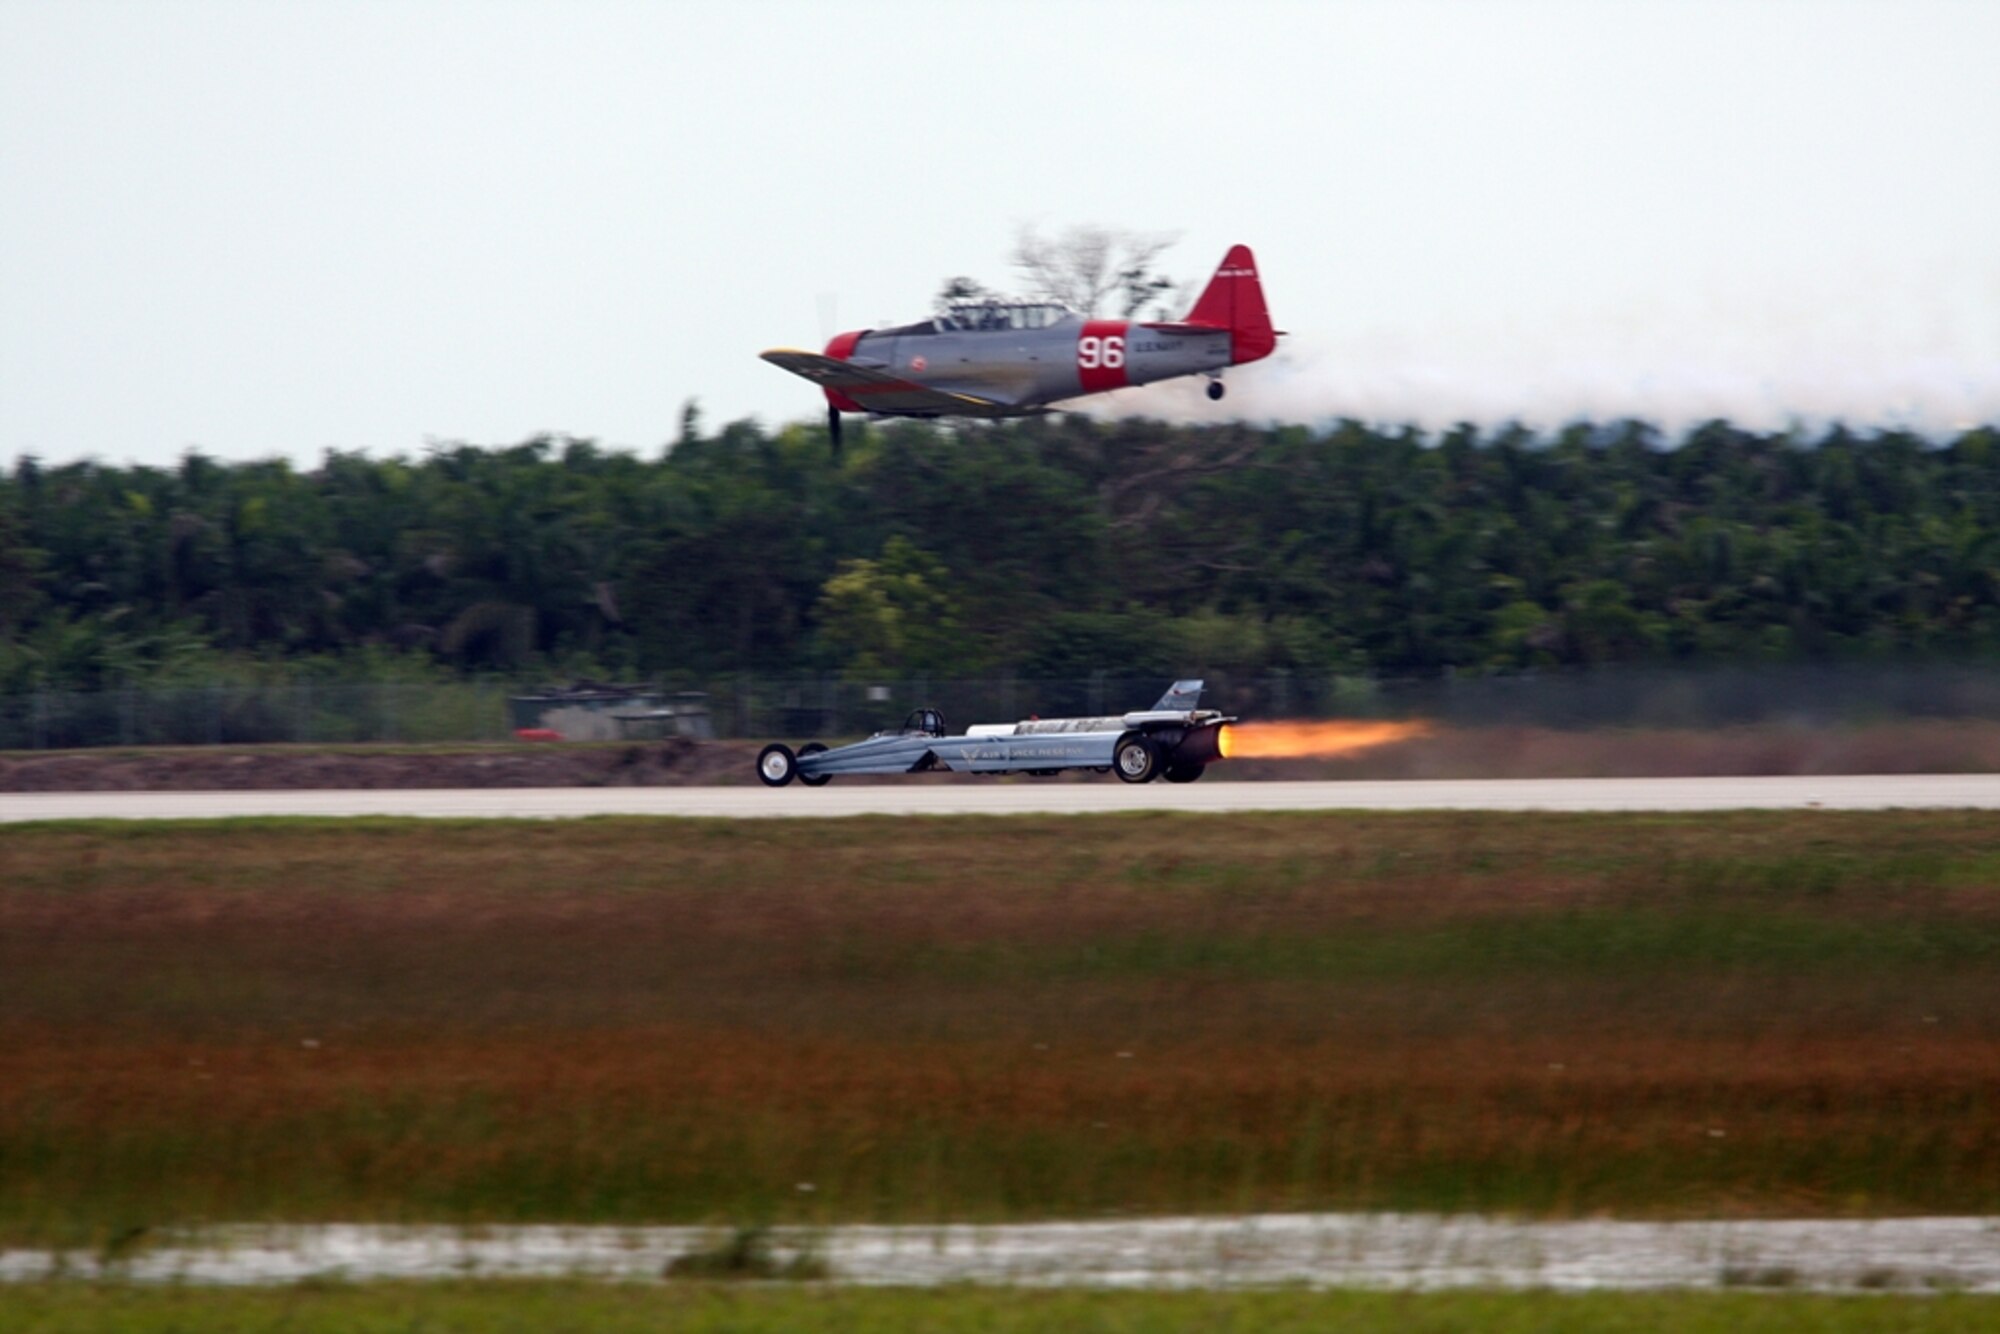 The Air Force Reserve Command Jet Car races an airplane during the Wings Over Homestead Air Show, Nov. 7-8. (U.S. Air Force photo/Tech. Sgt. Bucky Parrish)